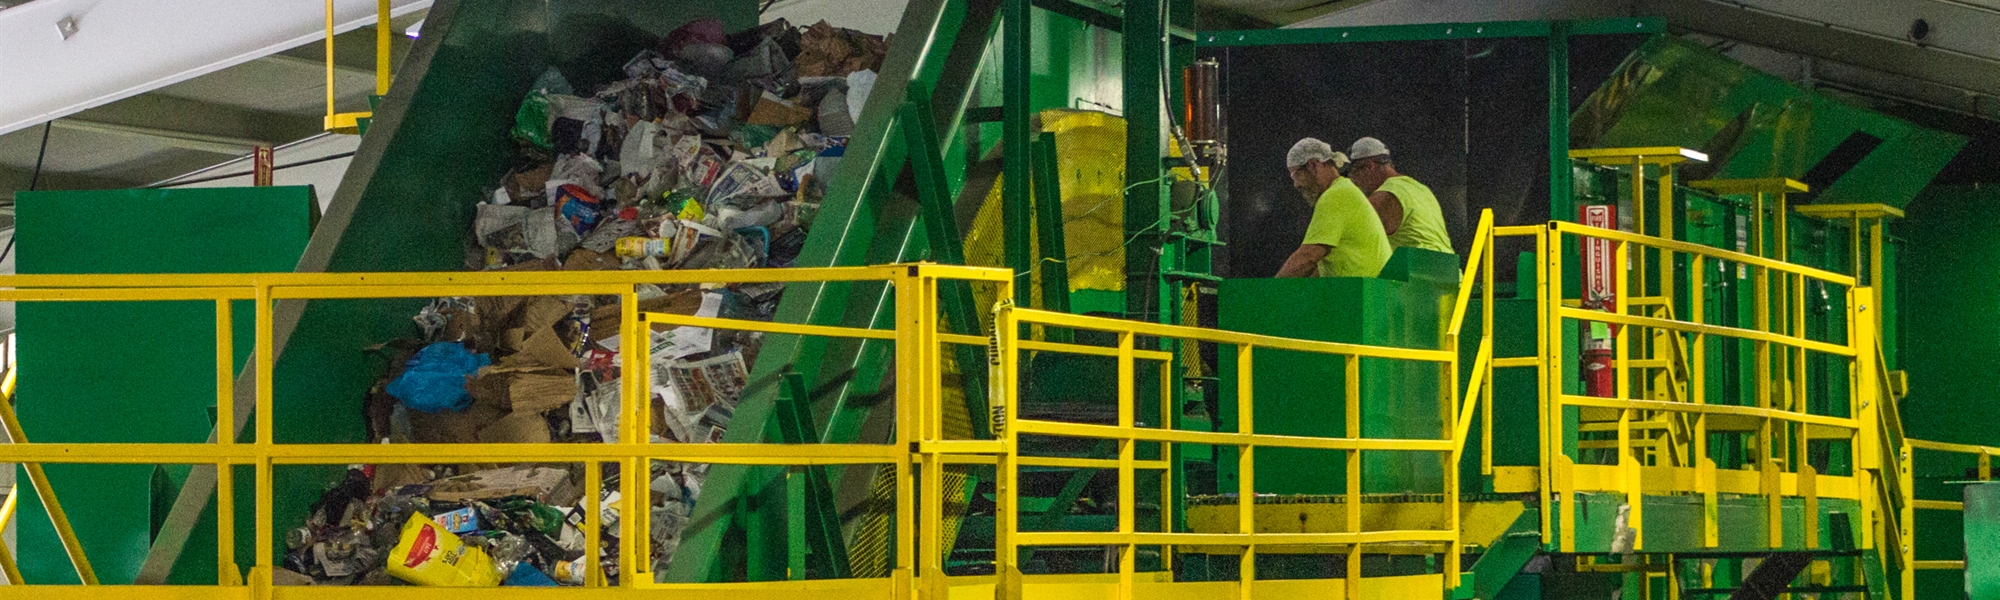 Processing Facilities - Pioneer Recycling Services